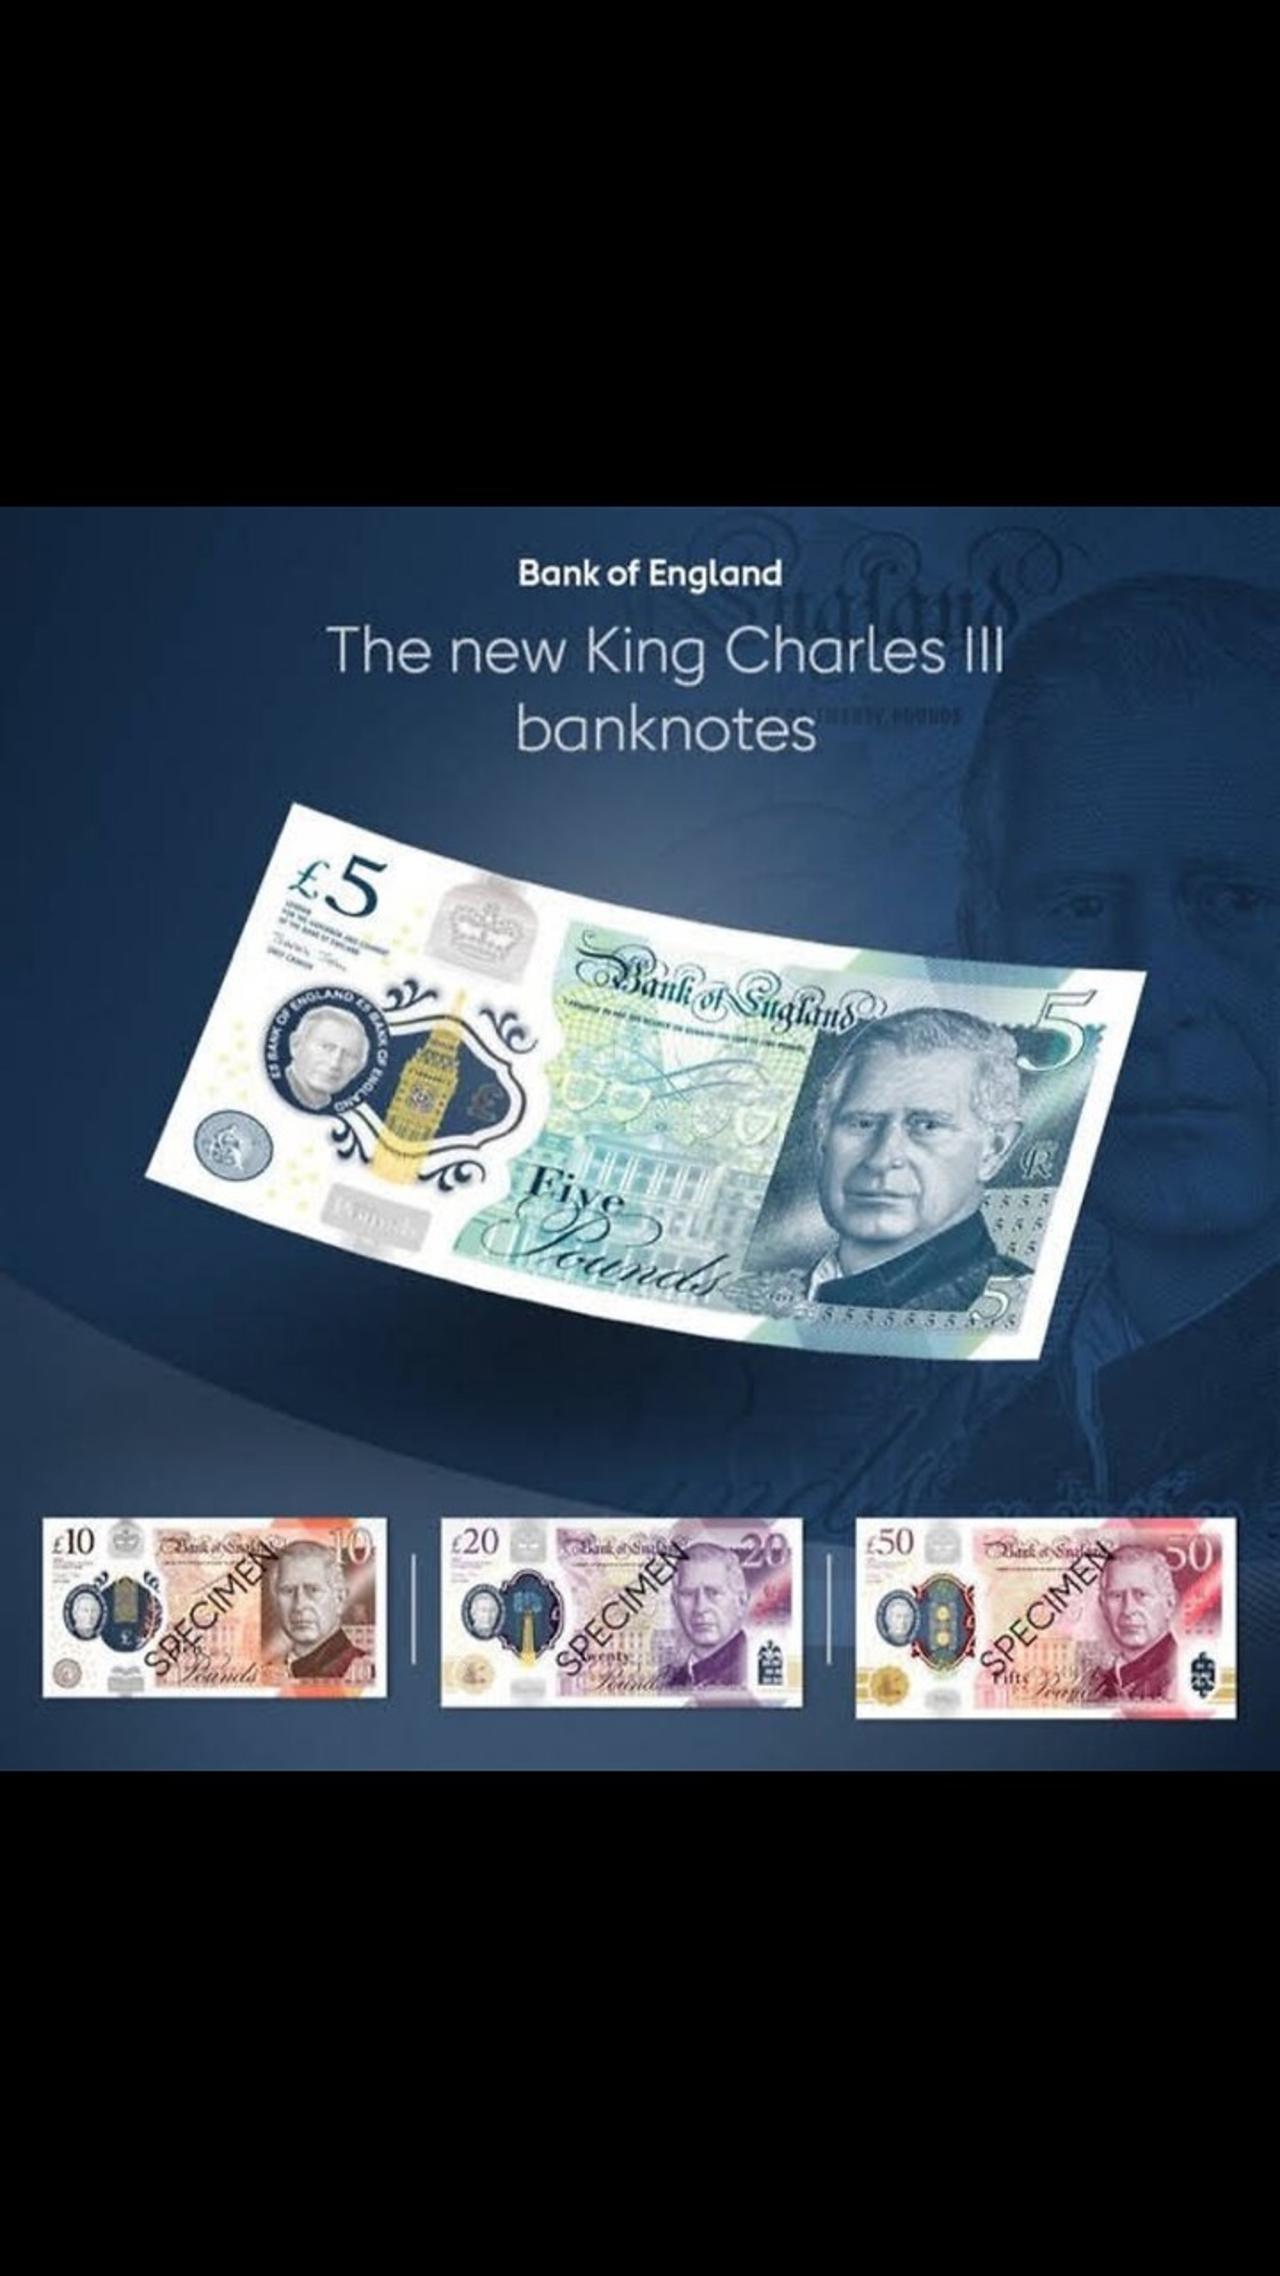 The Bank of England has unveiled the designs of King Charles III Bank notes